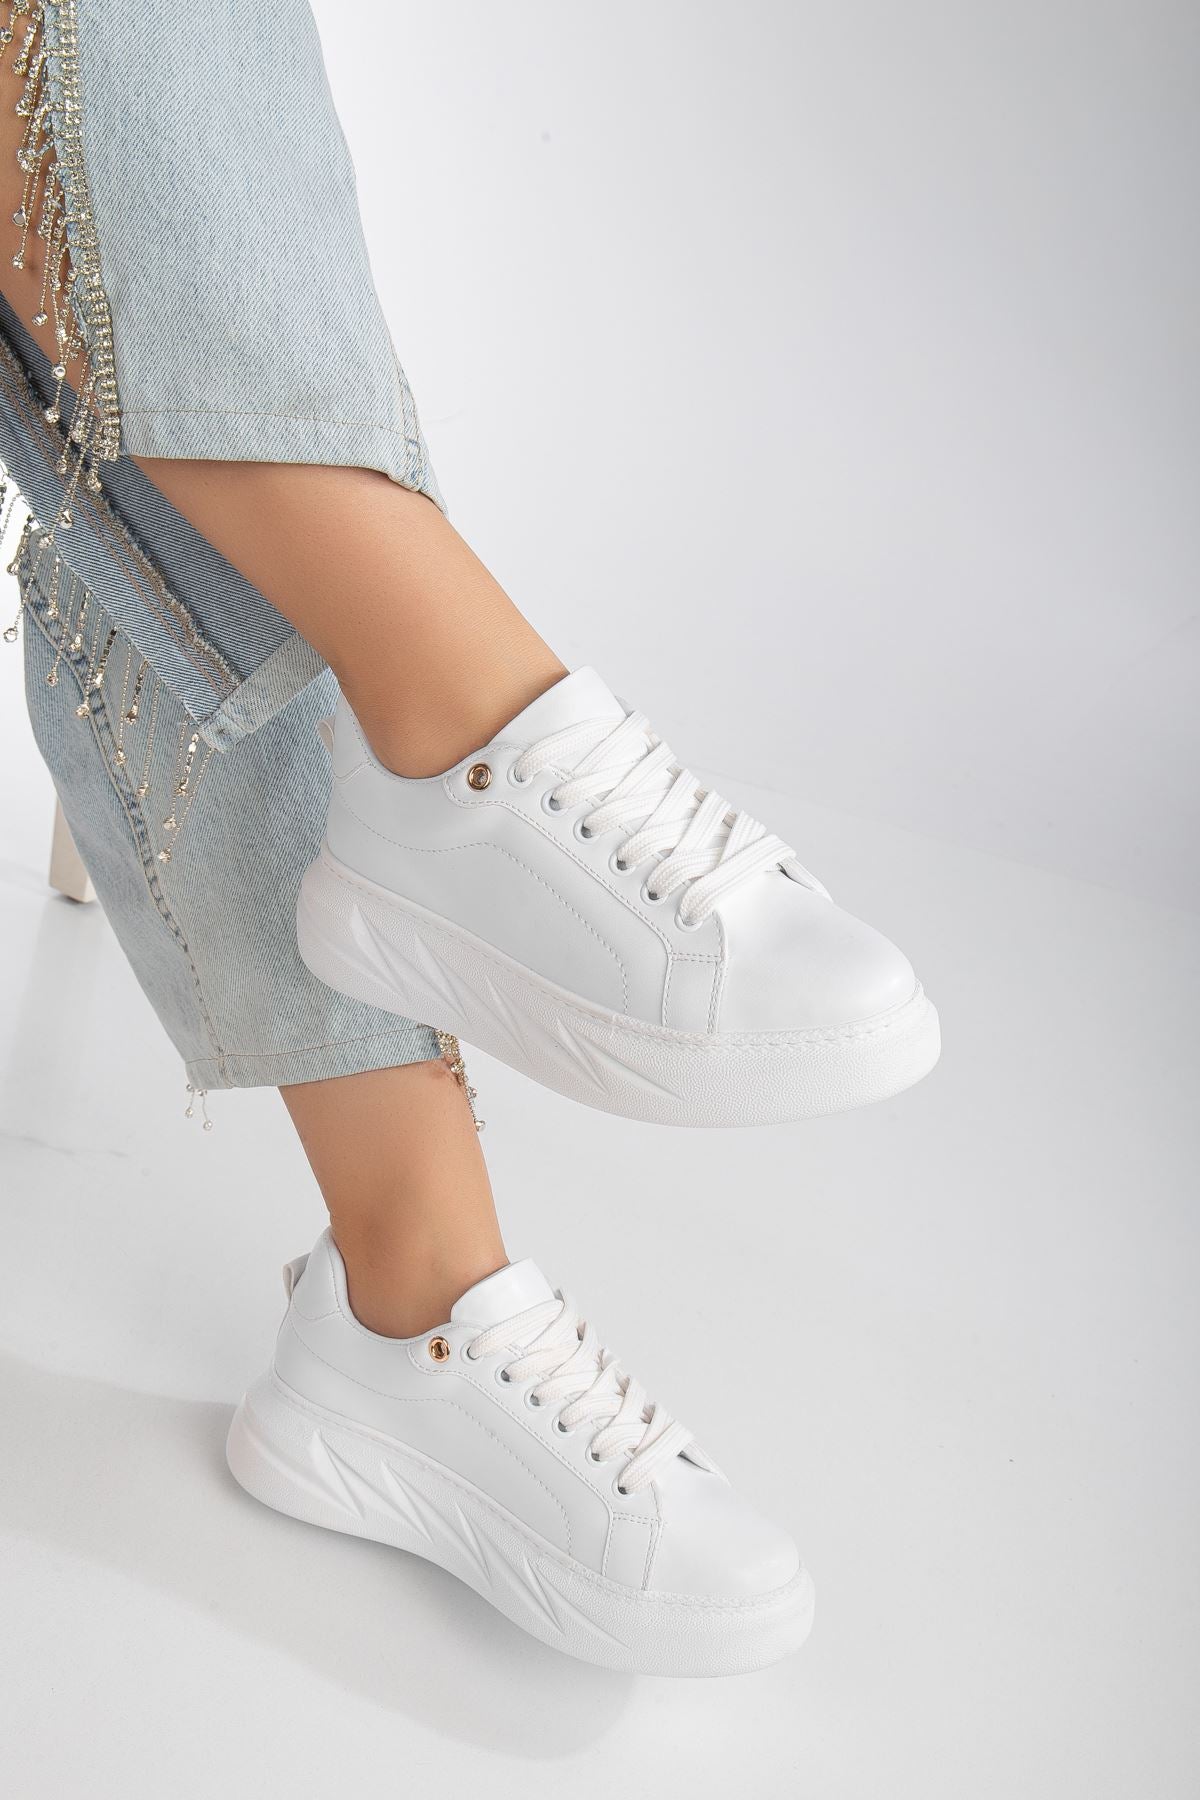 Women's Nerina White Skin Thick Sole Detailed Sneakers - STREETMODE™